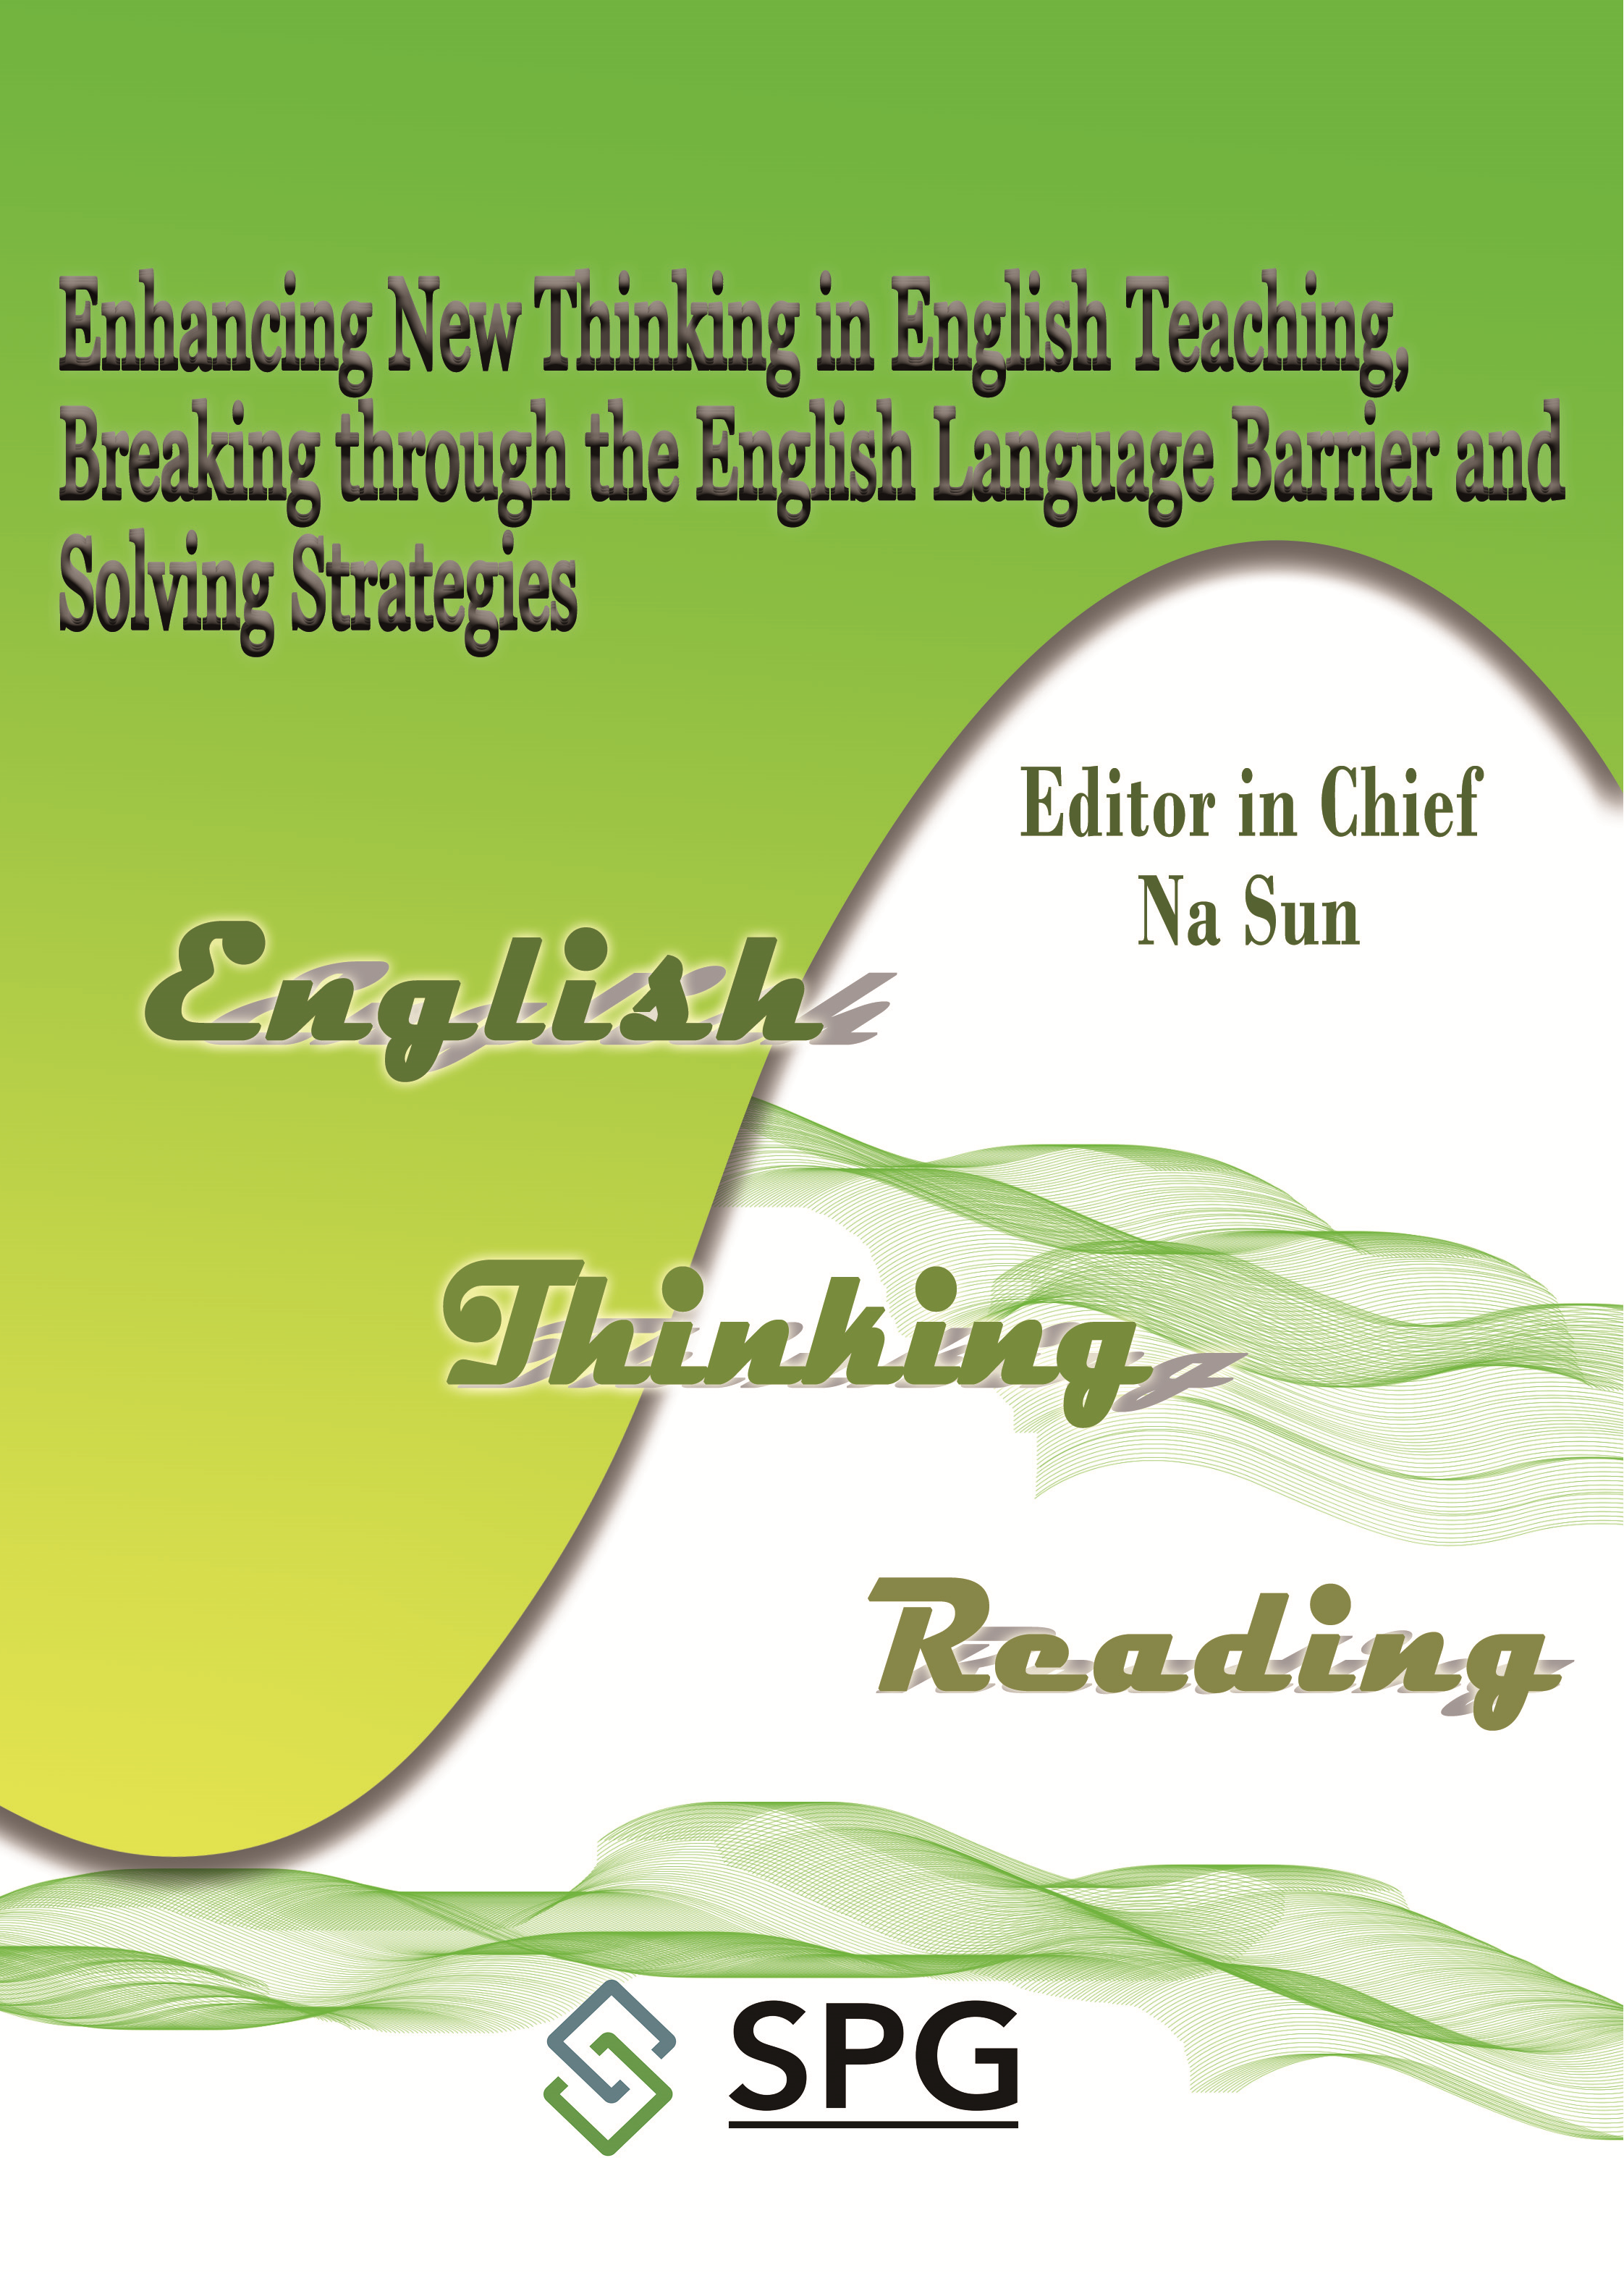 Enhancing New Thinking in English Teaching, Breaking through the English Language Barrier and Solving Strategies | Scholar Publishing Group